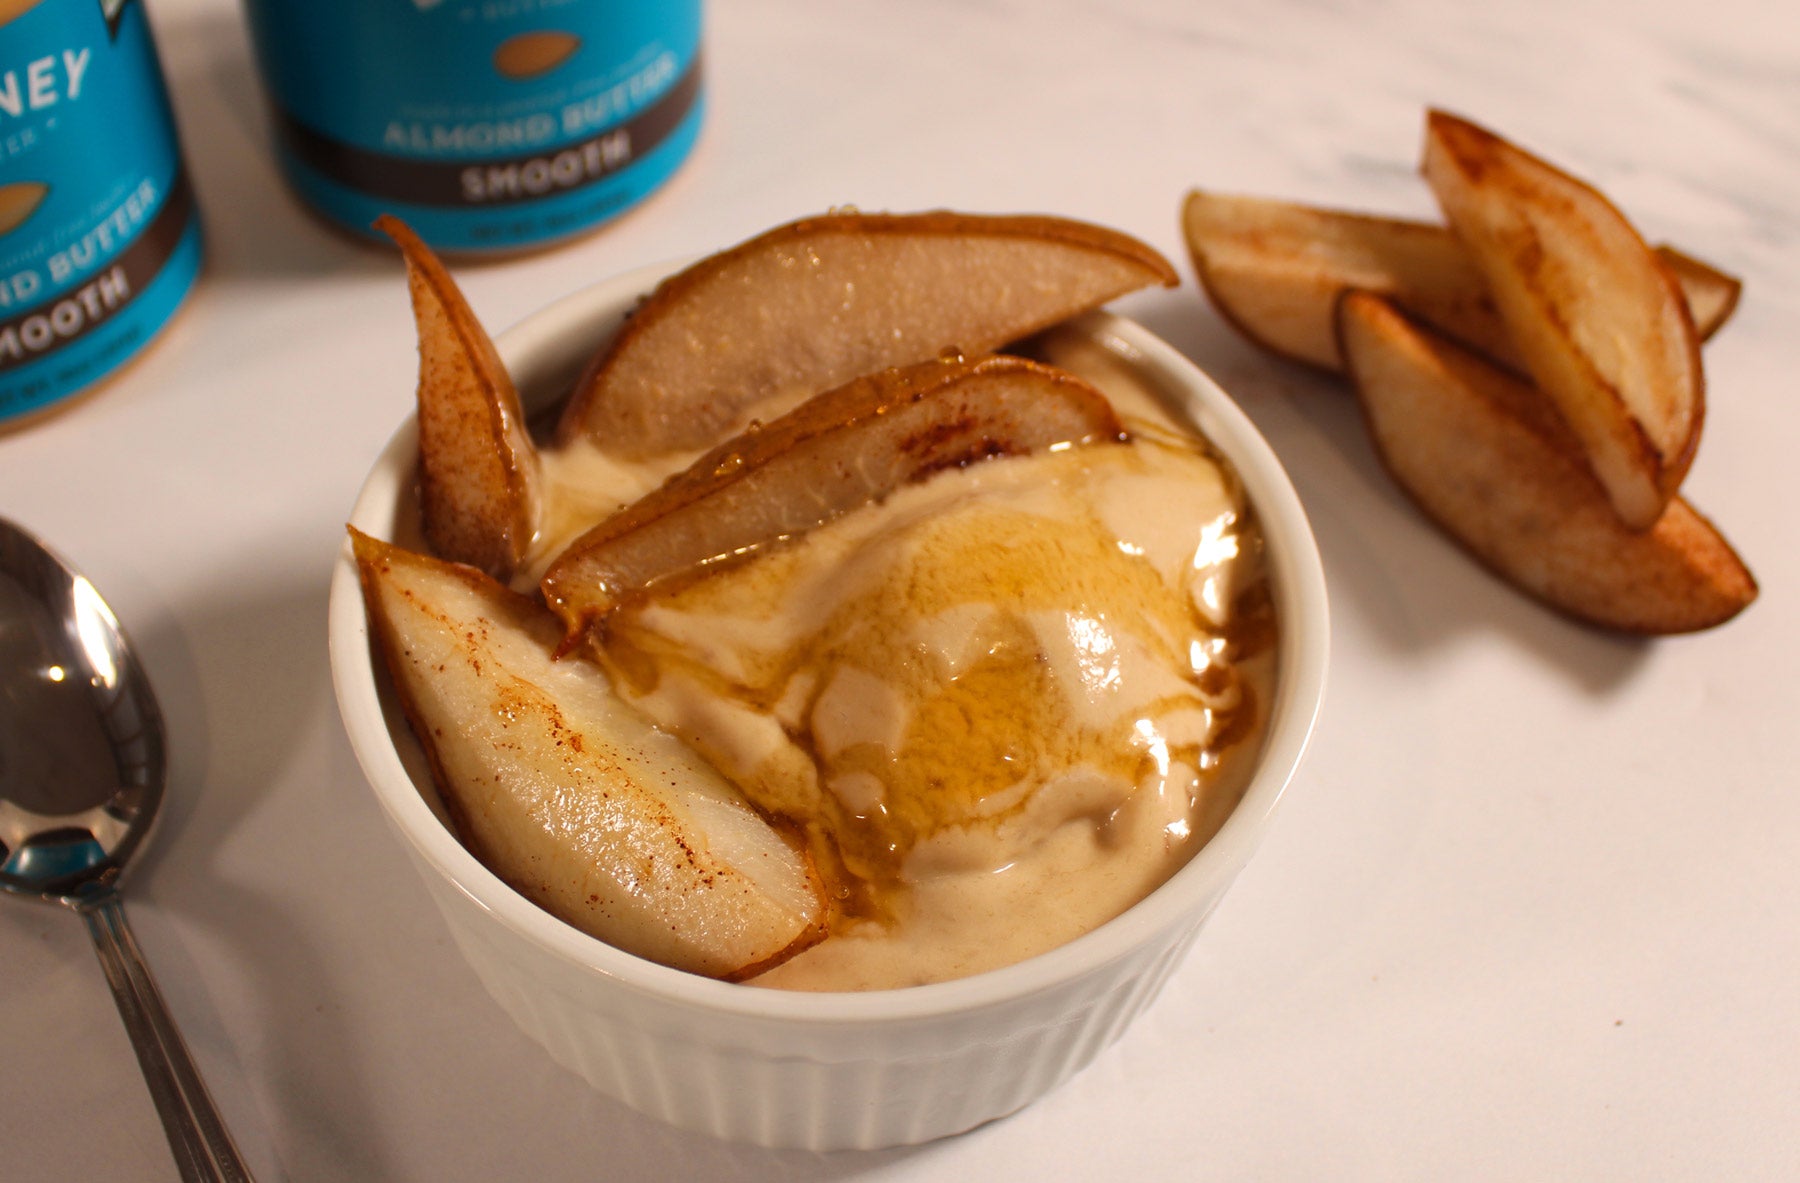 Baked Pears with Banana & Almond Butter Ice Cream